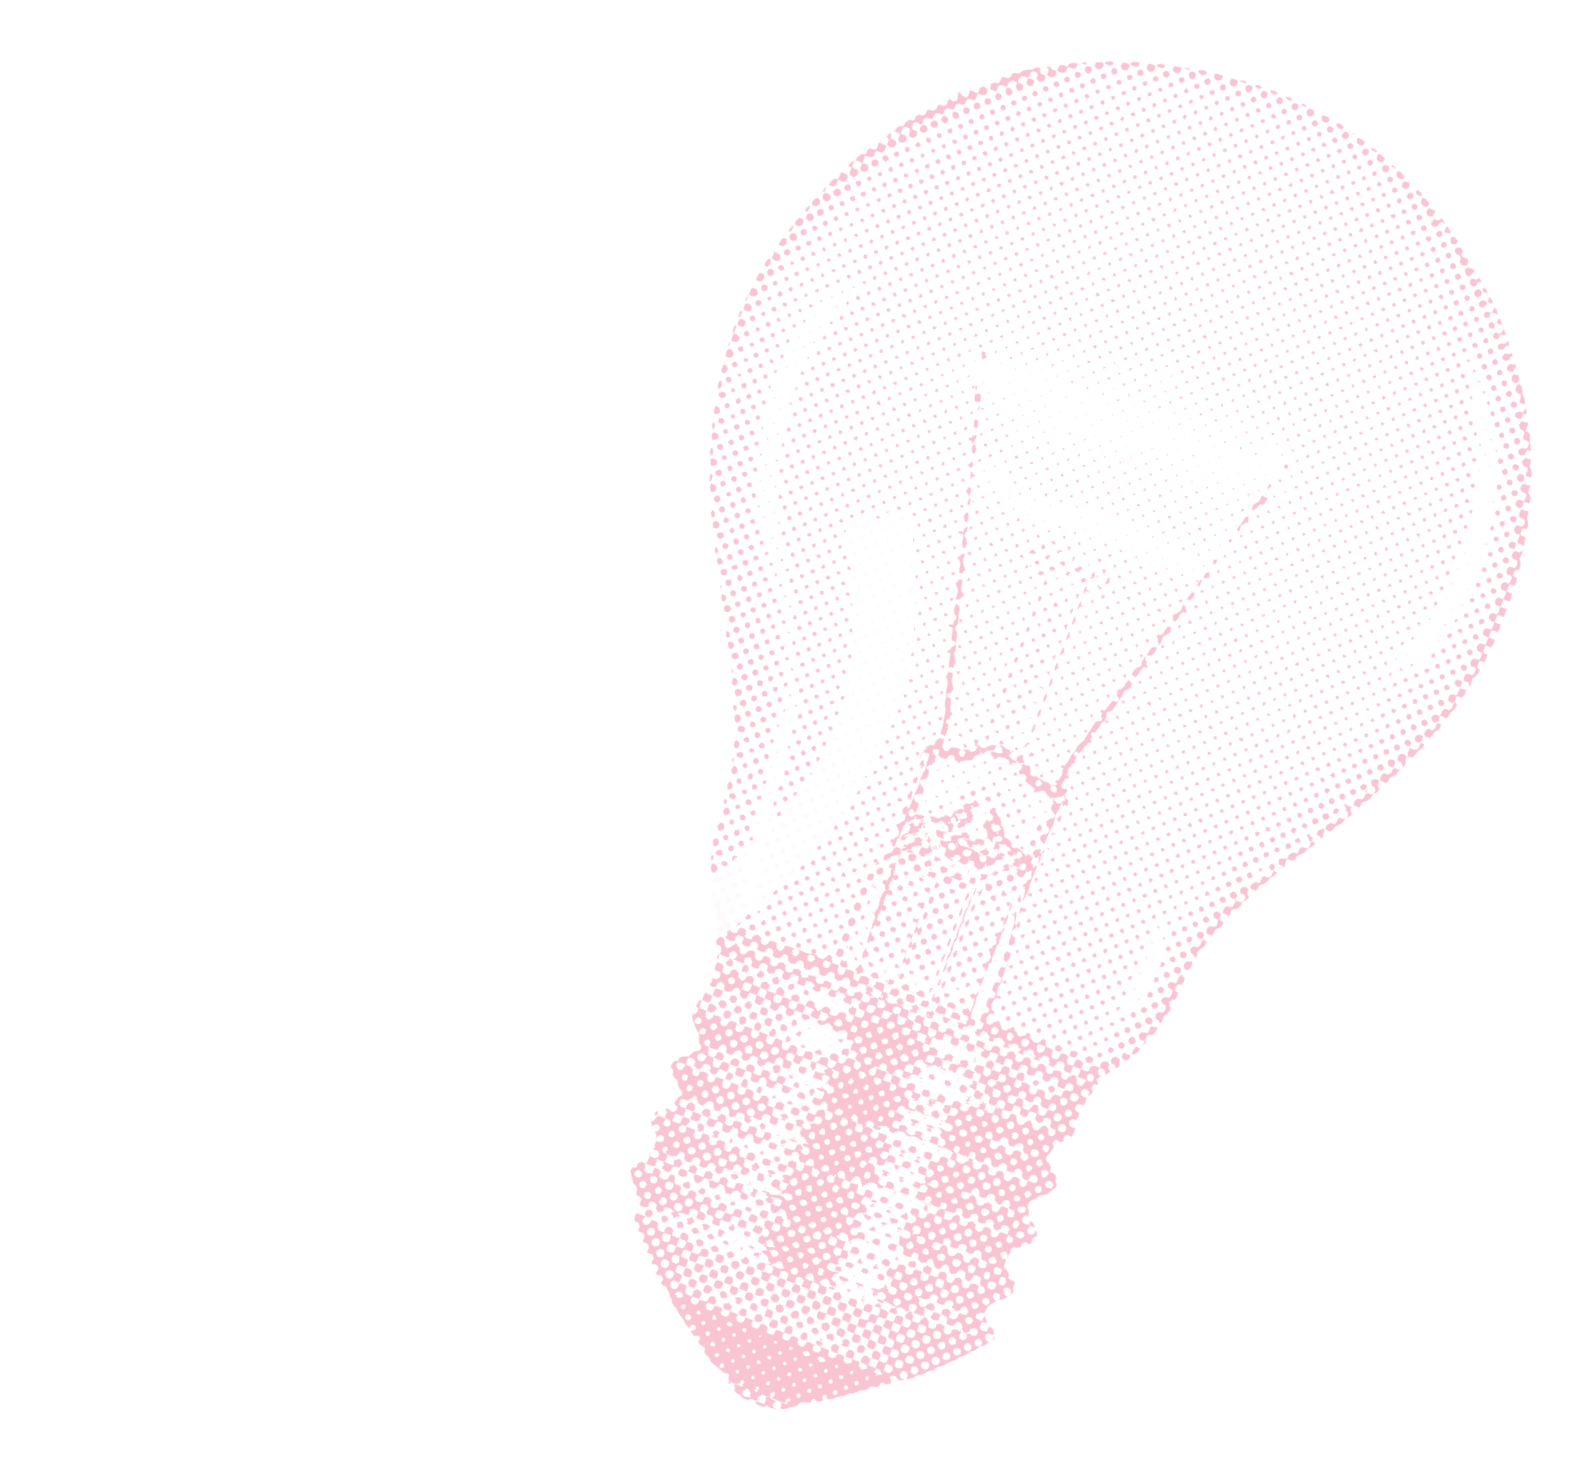 Lightning bulb and smiley face